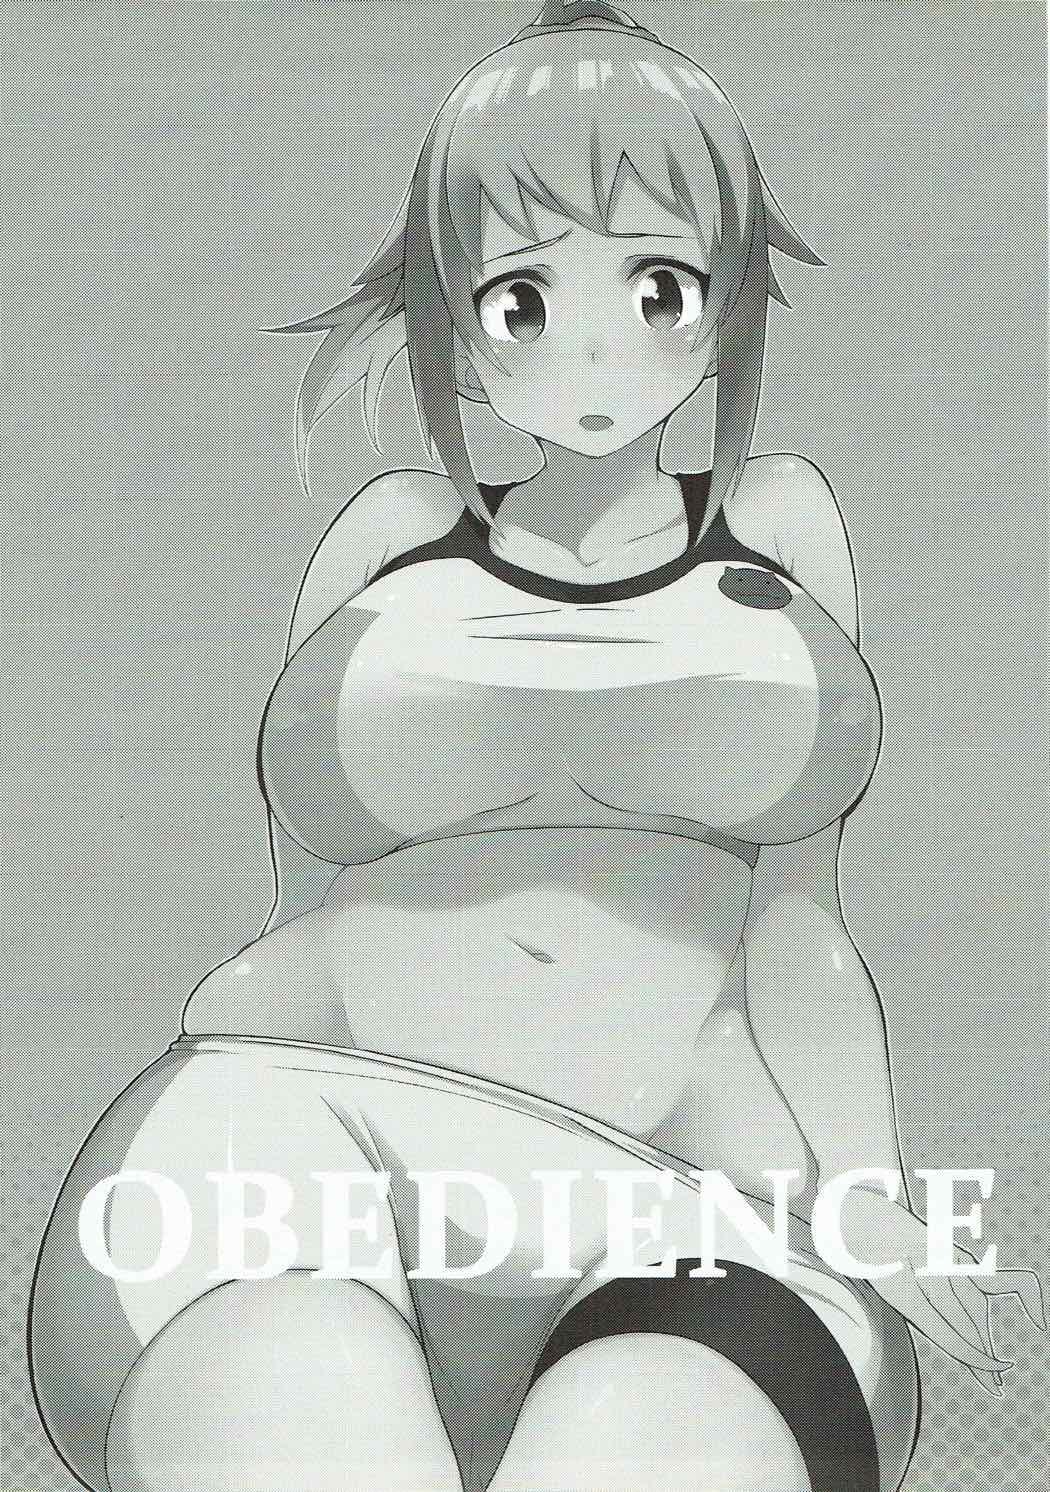 Obedience 3